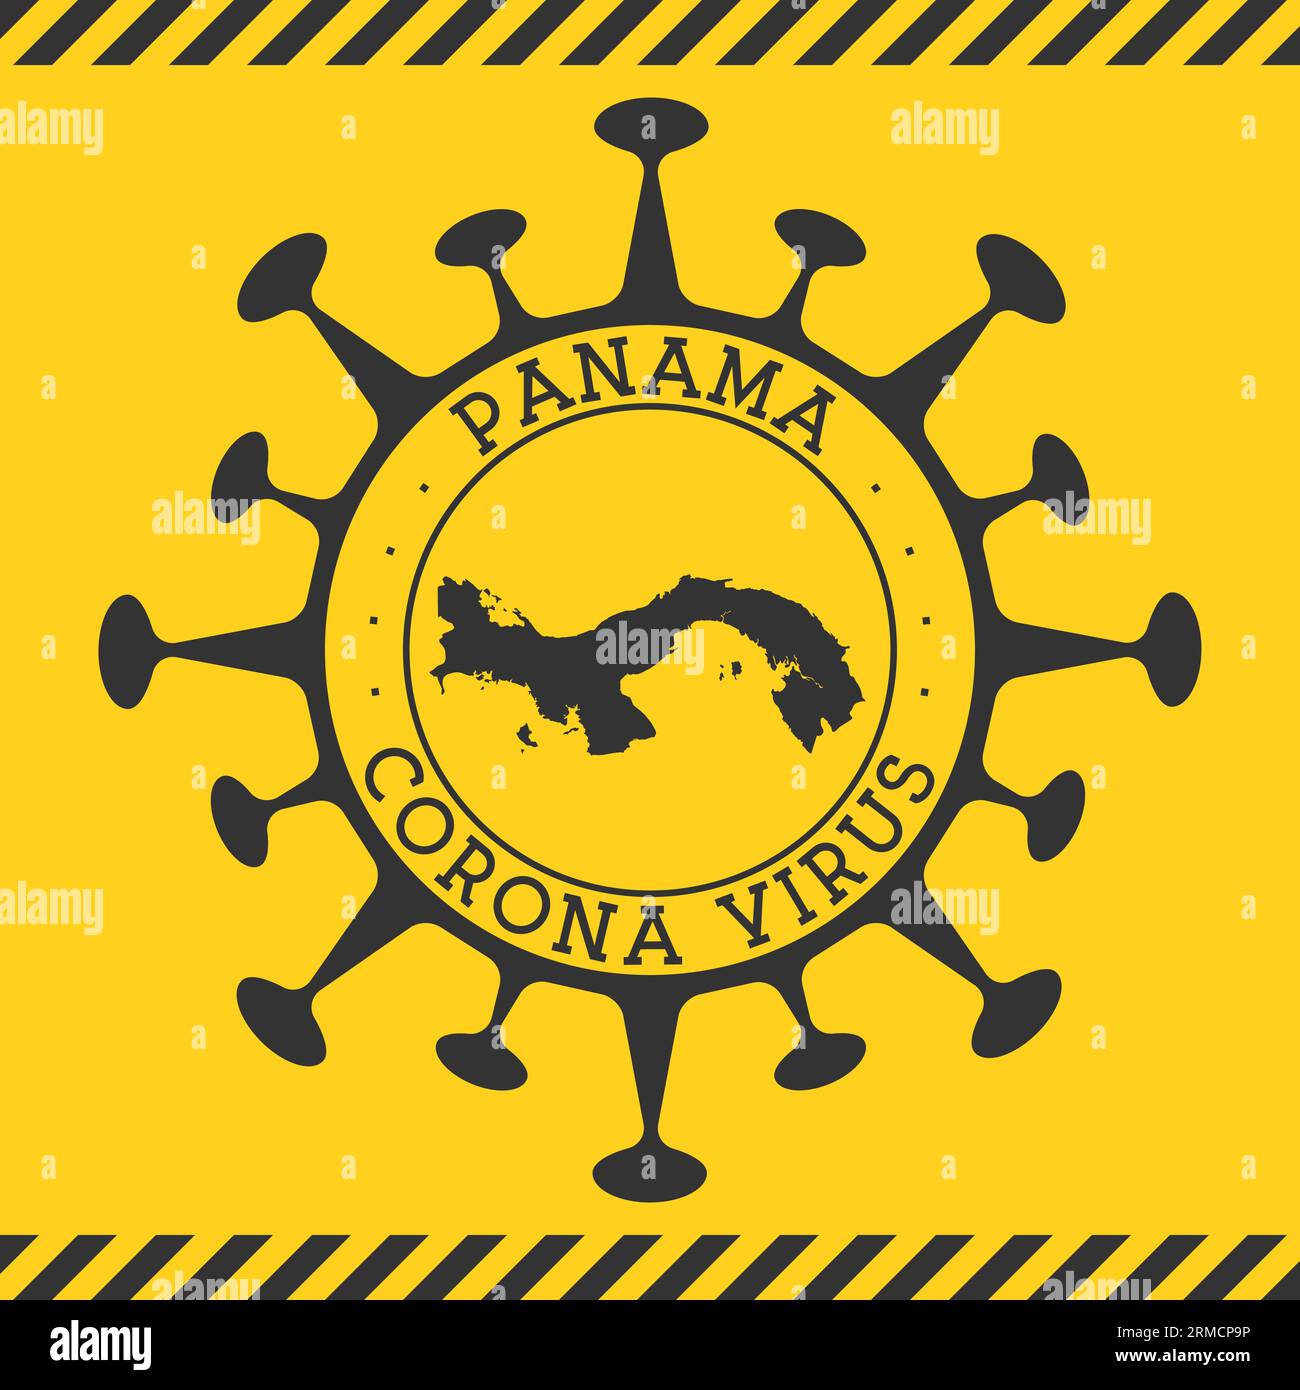 Corona virus in Panama sign. Round badge with shape of virus and Panama map. Yellow country epidemy lock down stamp. Vector illustration. Stock Vector